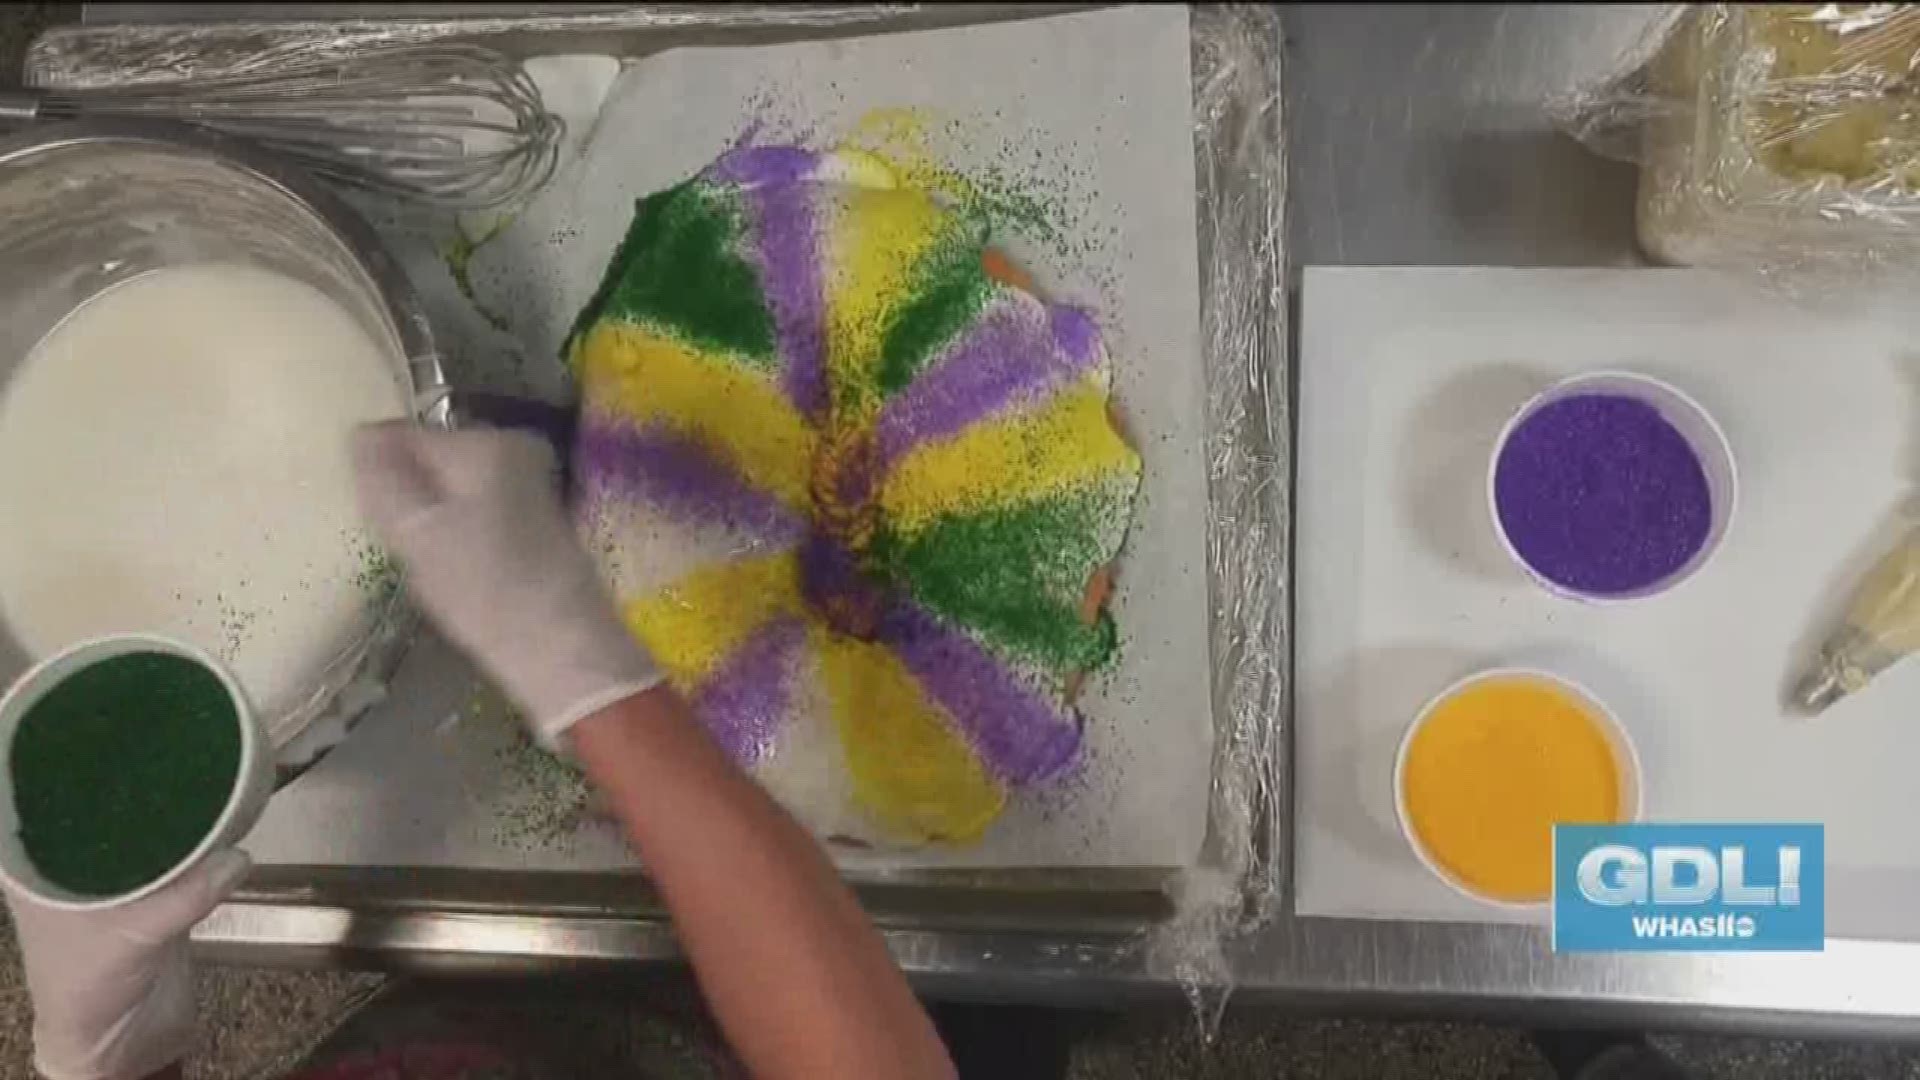 Great Day Live stopped by Adrienne & Co. to learn more about King cakes and how they are made.